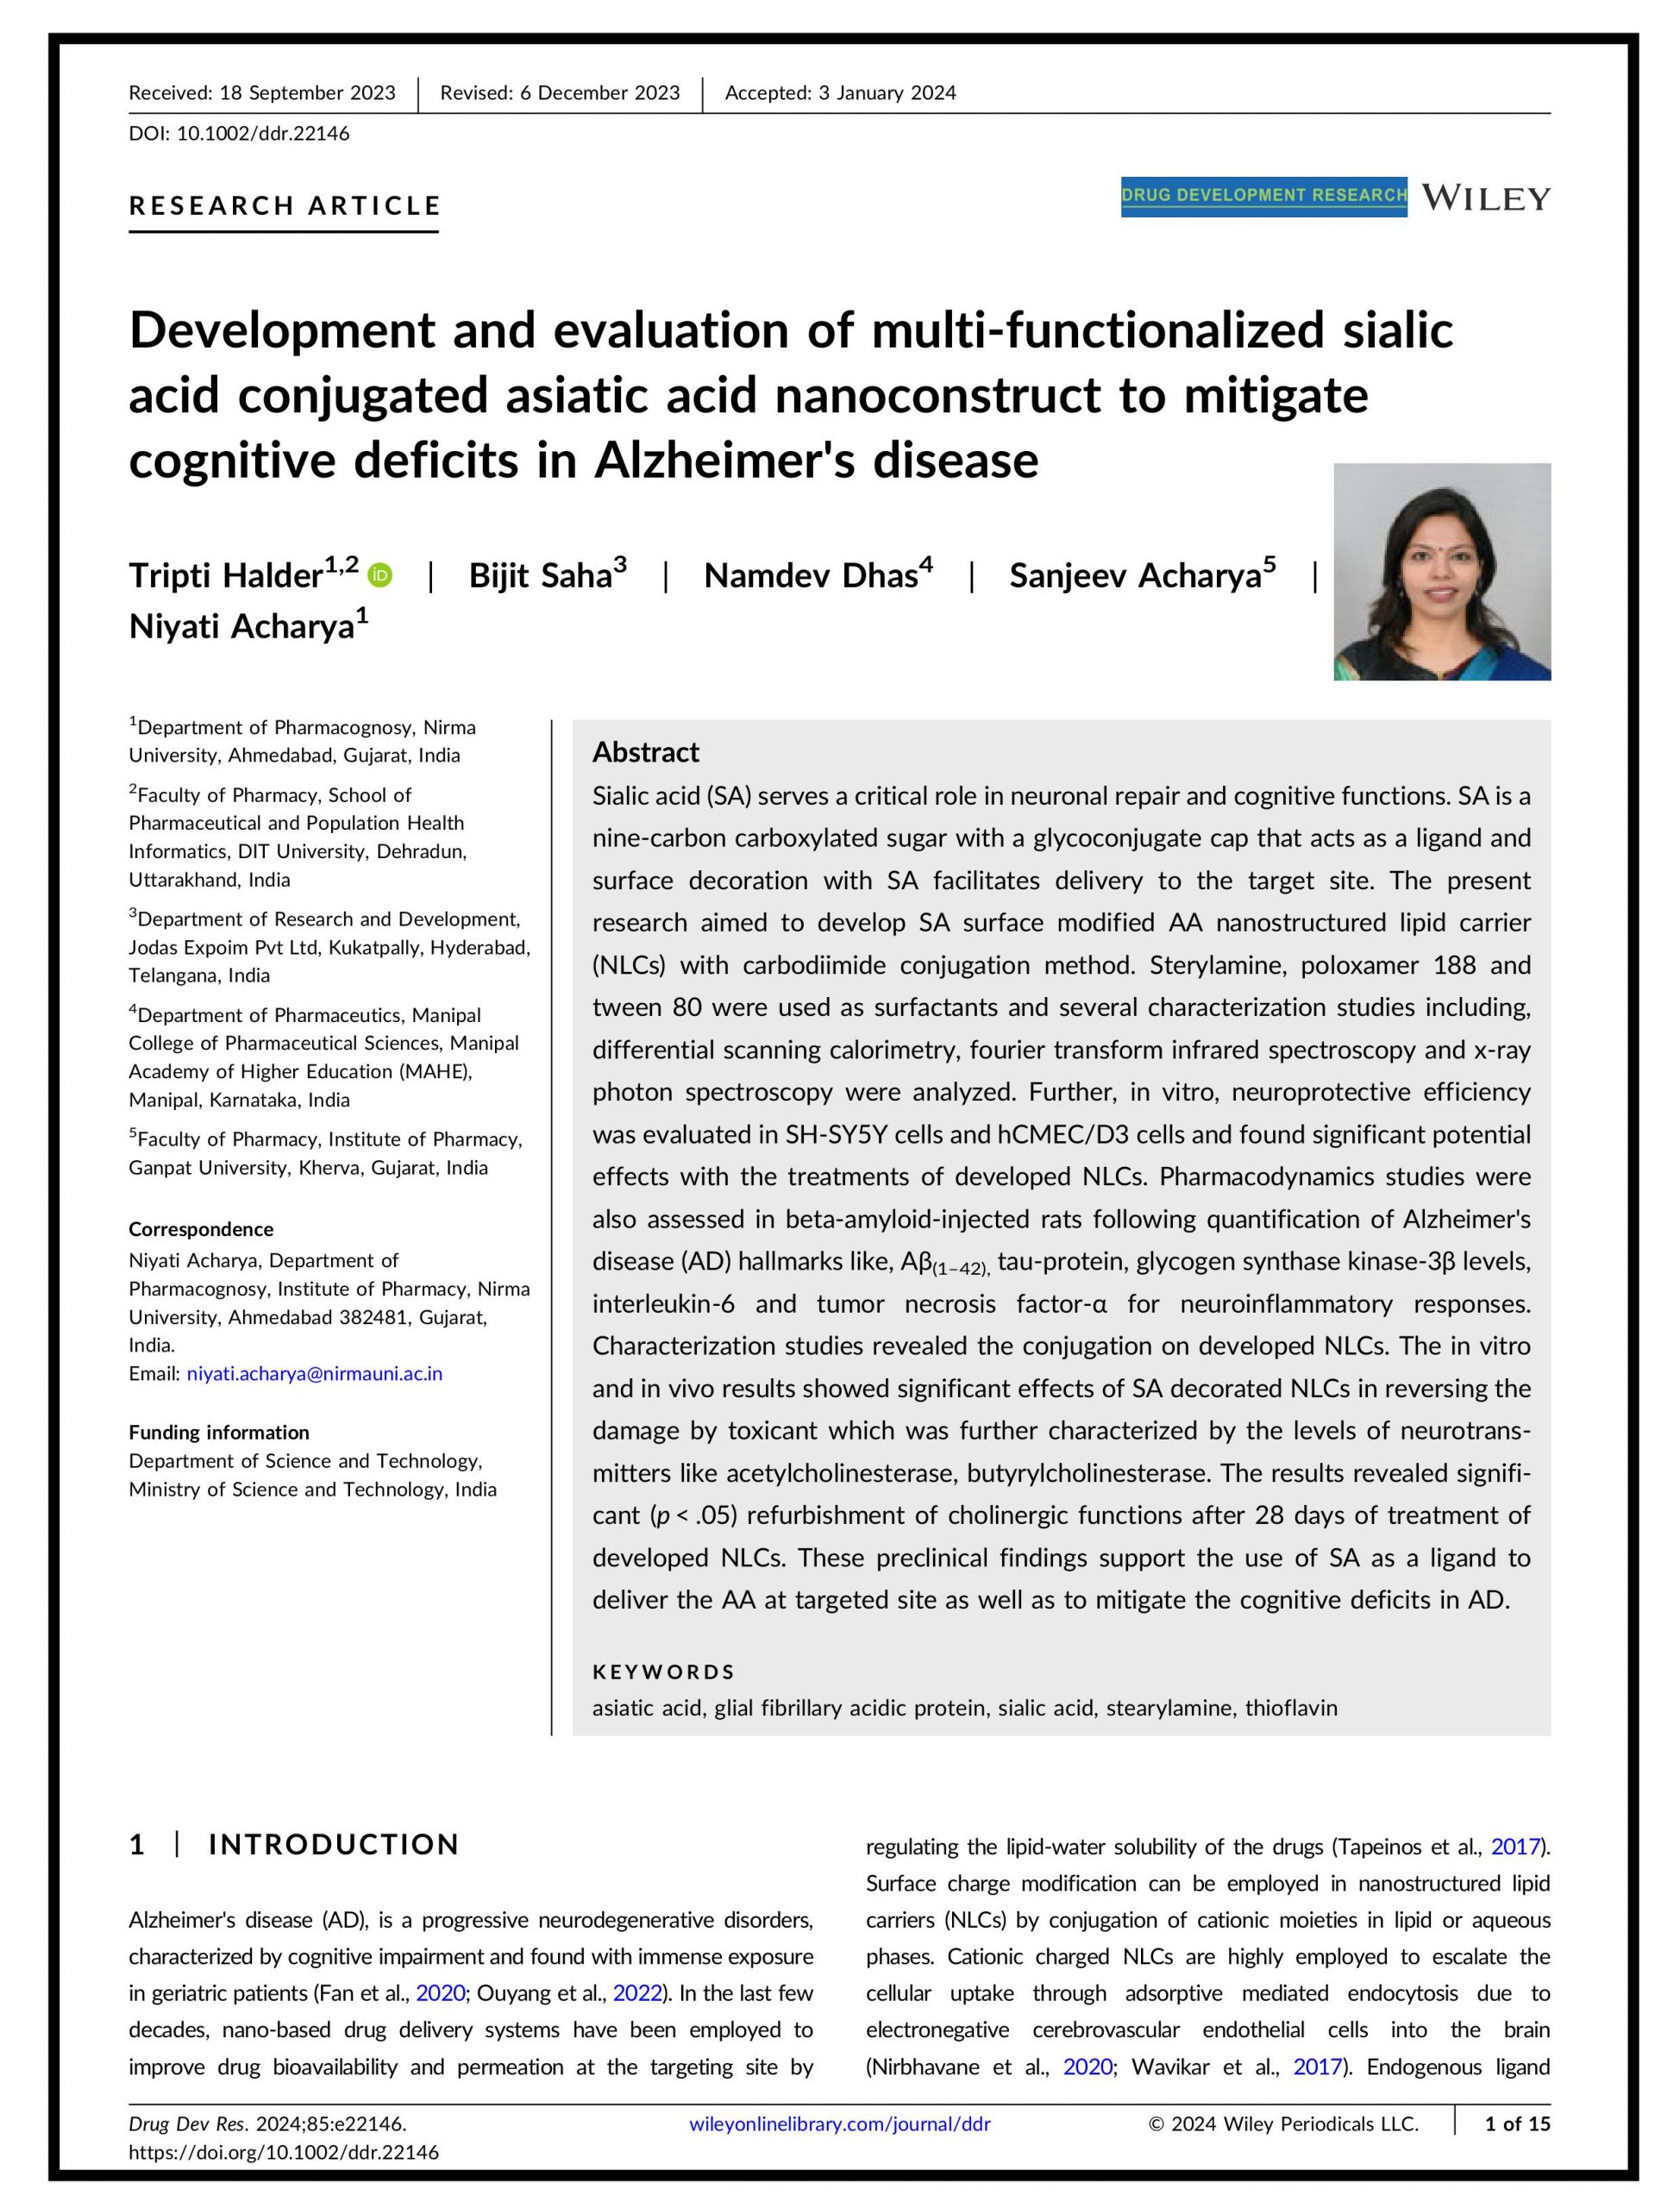 Development and evaluation of multi‐functionalized sialic acid conjugated asiatic acid nanoconstruct to mitigate cognitive deficits in Alzheimer’s disease